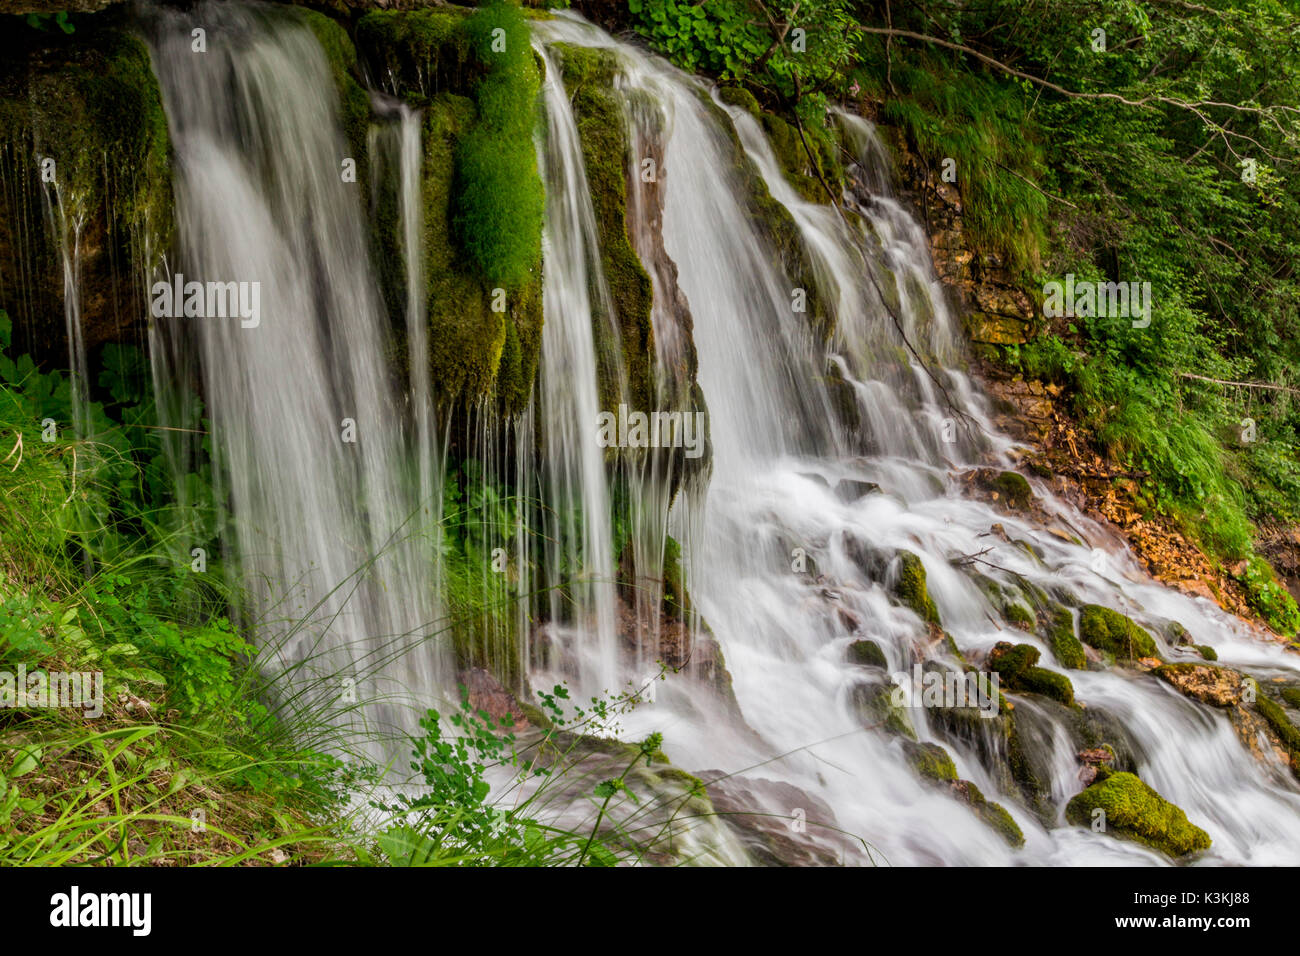 Ephemeral waterfall in the valley of San Lucano, Agordino, Dolomites. The water seems to flow from the heart of the mountain. All around the green moss and plants characteristic of wetlands. Stock Photo